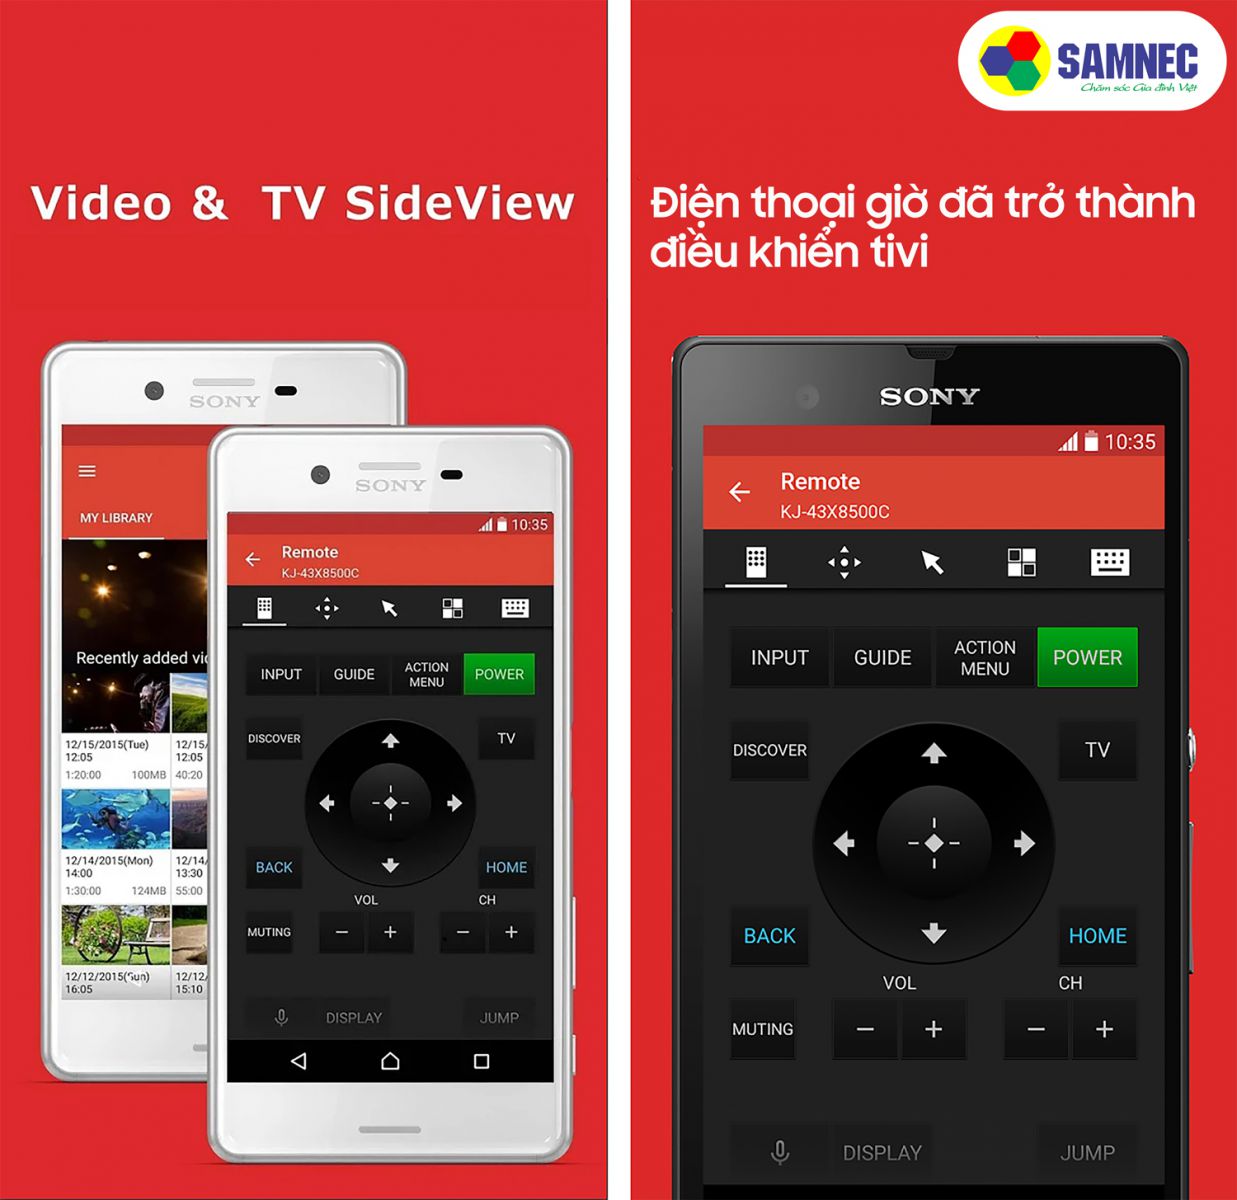 Video & TV SideView 